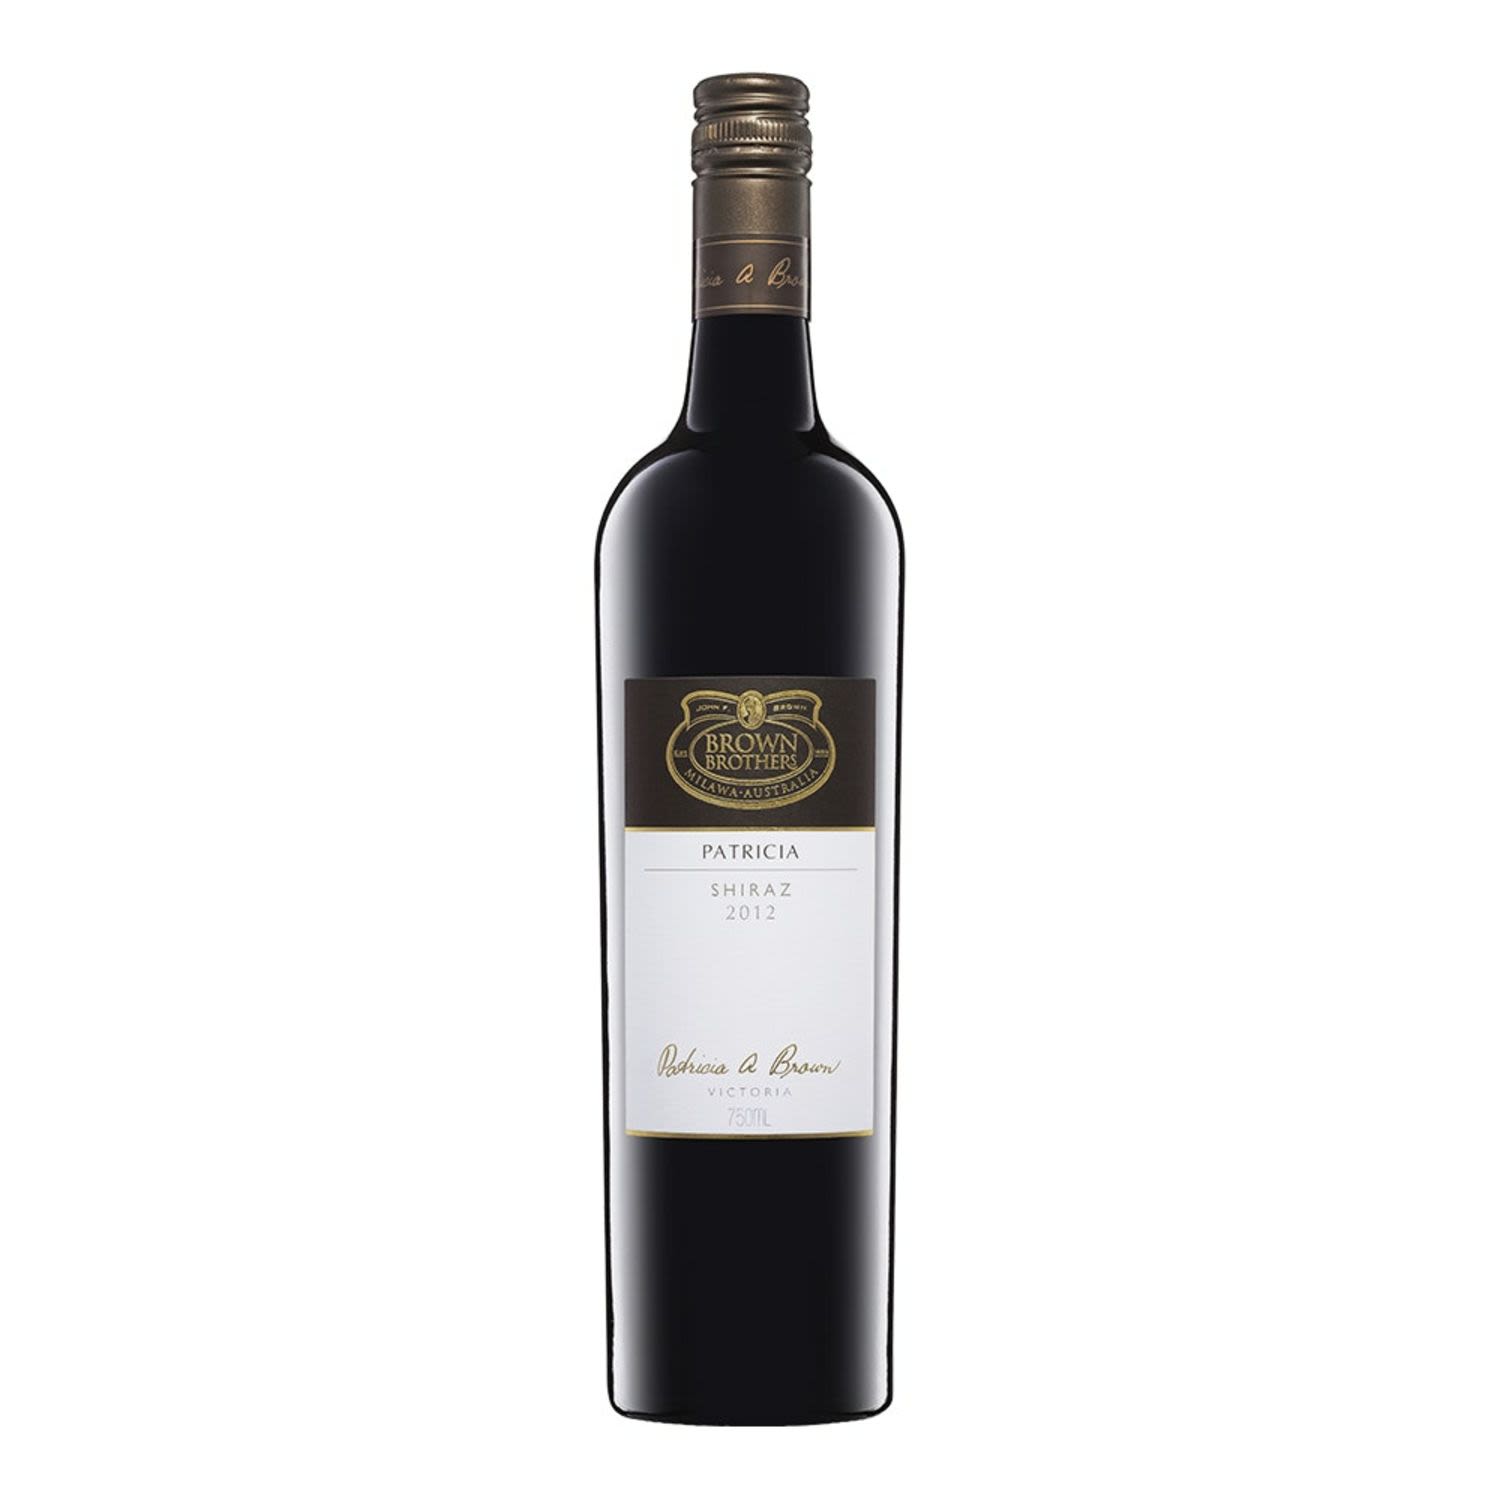 This wine shows dark spices, white pepper, red fruits, dark plums and aromatic spices on the nose. The palate flows on to display dark spices, vanilla, dark plums and red berry nuances. It's a warm and inviting wine that will age gracefully for many years.  <br /> <br />Alcohol Volume: 14.00%<br /><br />Pack Format: Bottle<br /><br />Standard Drinks: 8.3</br /><br />Pack Type: Bottle<br /><br />Country of Origin: Australia<br /><br />Region: Victoria<br /><br />Vintage: '2012<br />